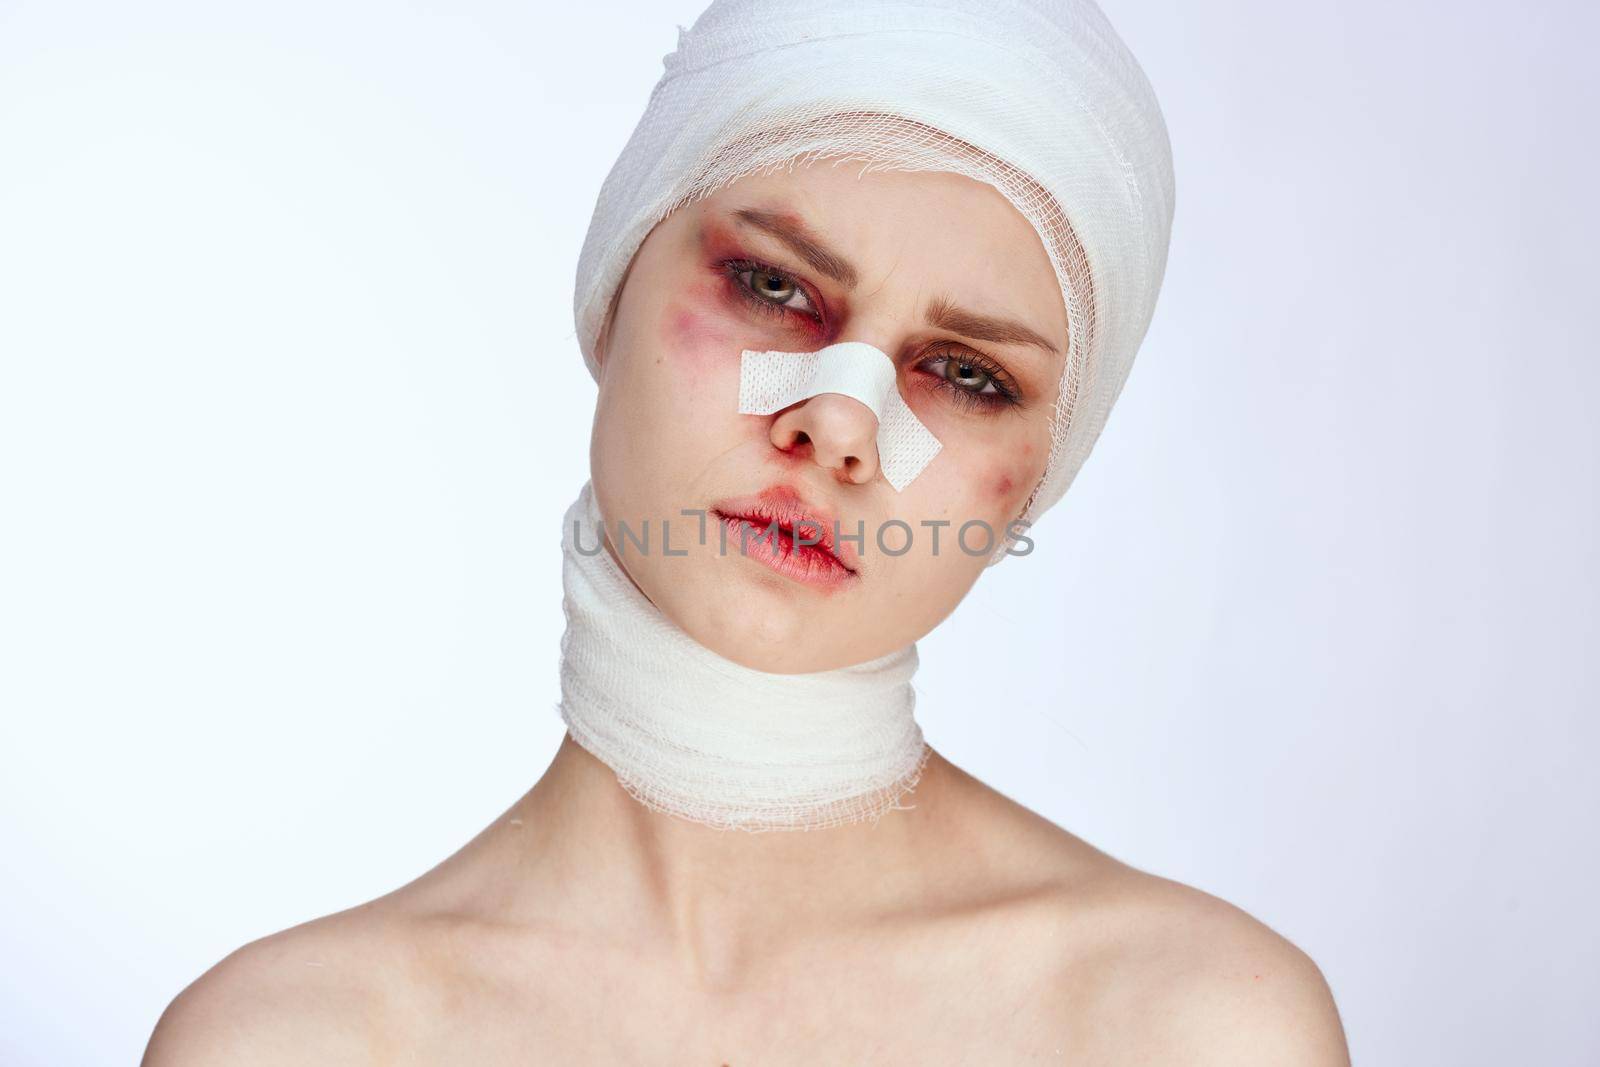 a person plastic surgery operation bare shoulders studio lifestyle. High quality photo